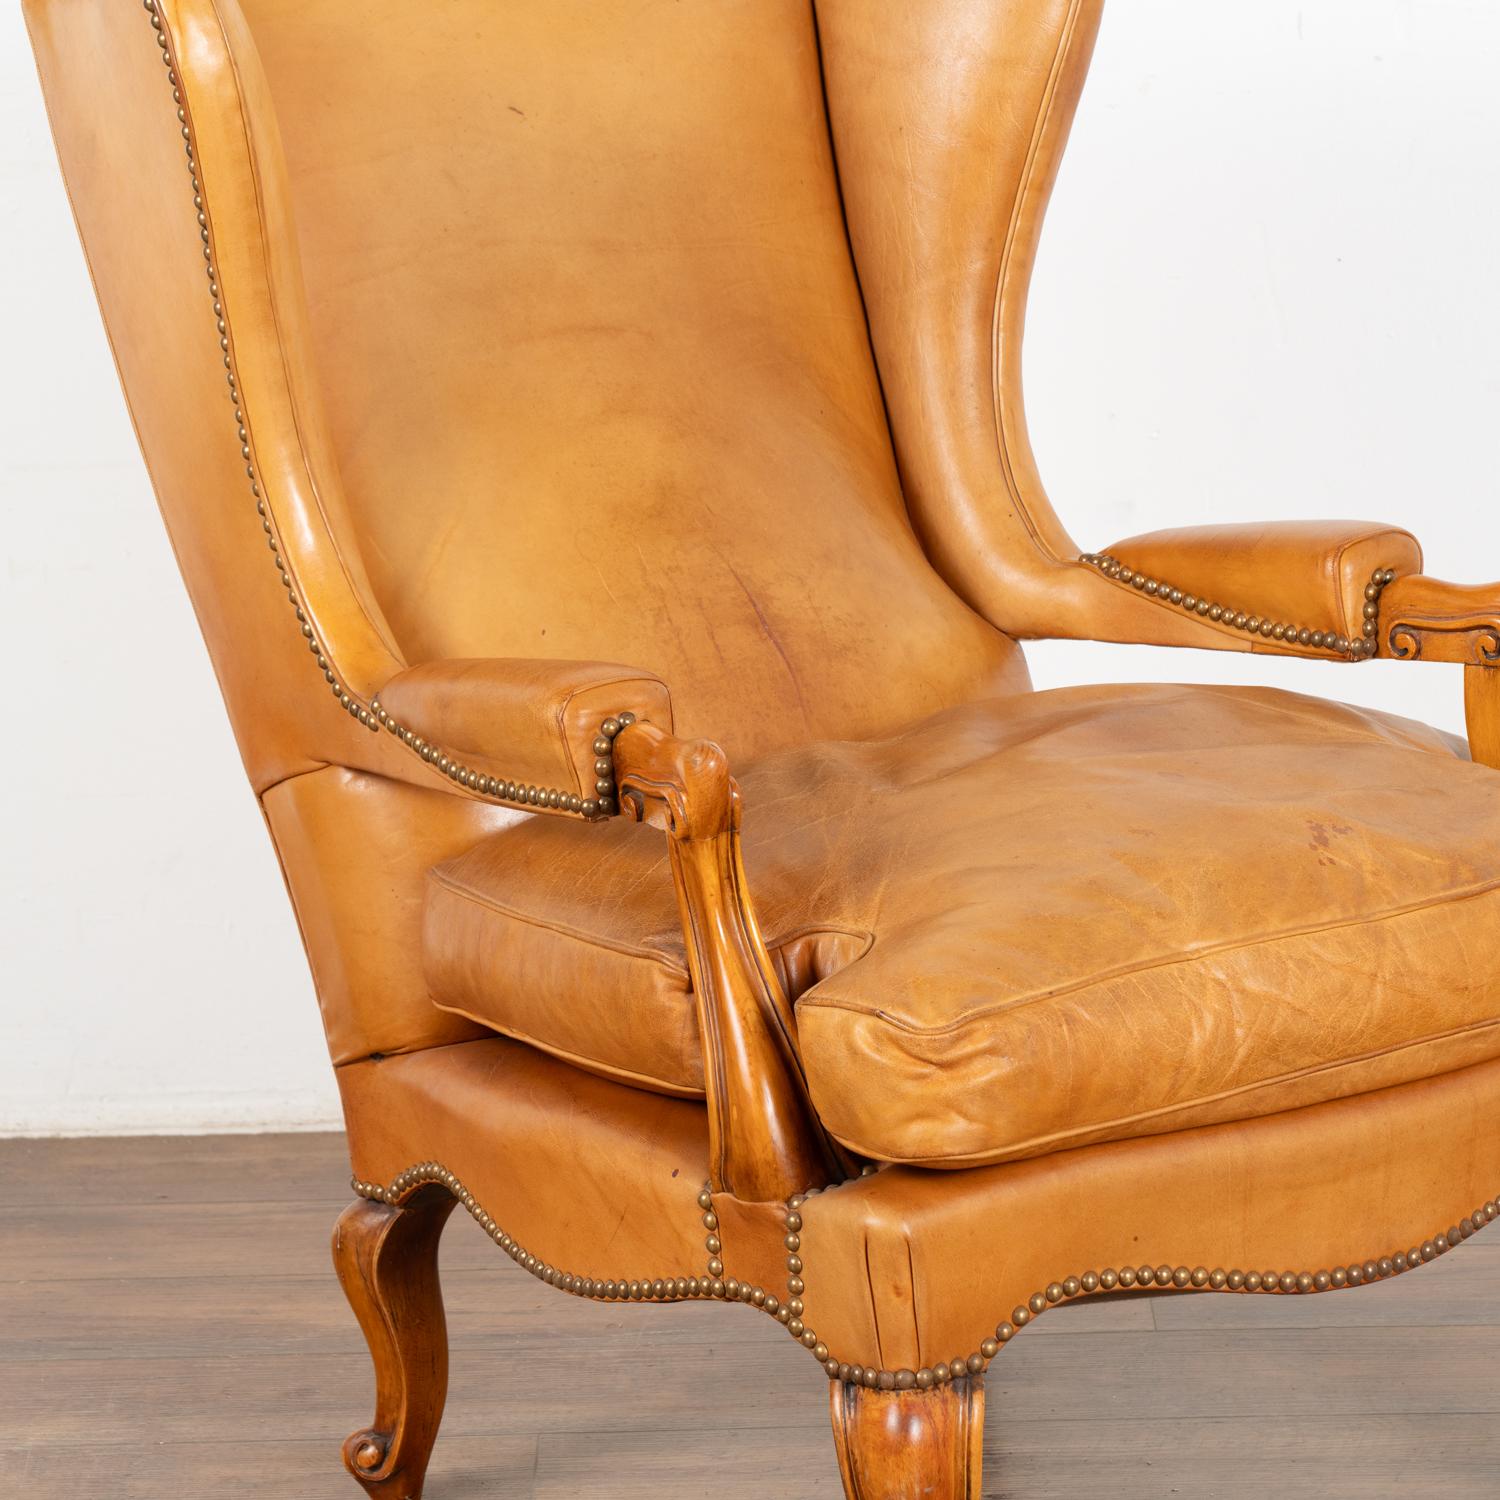 Vintage Camel Colored Leather Wingback Armchair, Denmark circa 1940 In Good Condition For Sale In Round Top, TX